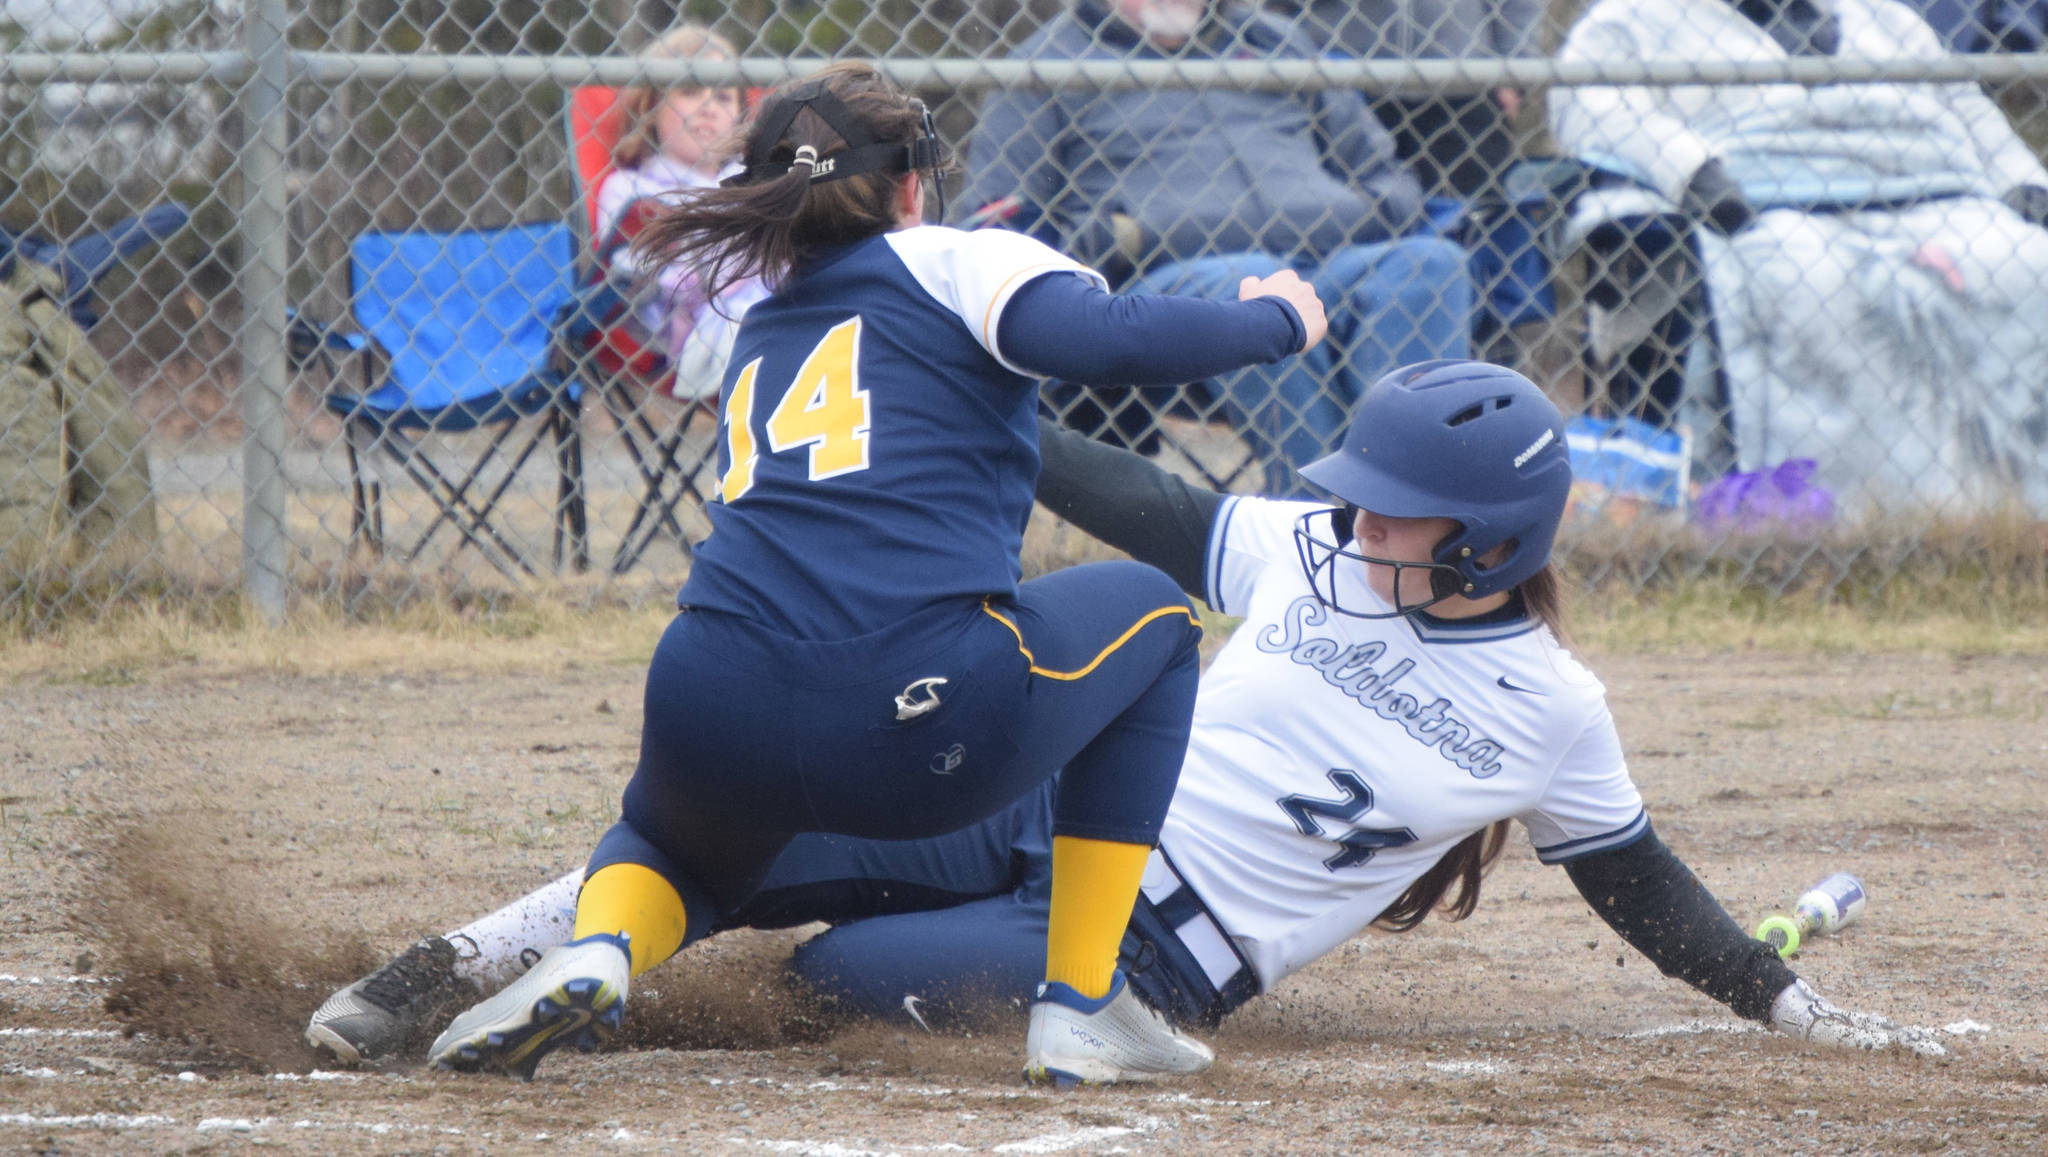 Soldotna’s Lexi Stormo slides under the tag of Homer pitcher Zoe Adkins on Thursday, May 20, 2021, in Soldotna, Alaska. (Photo by Jeff Helminiak/Peninsula Clarion)